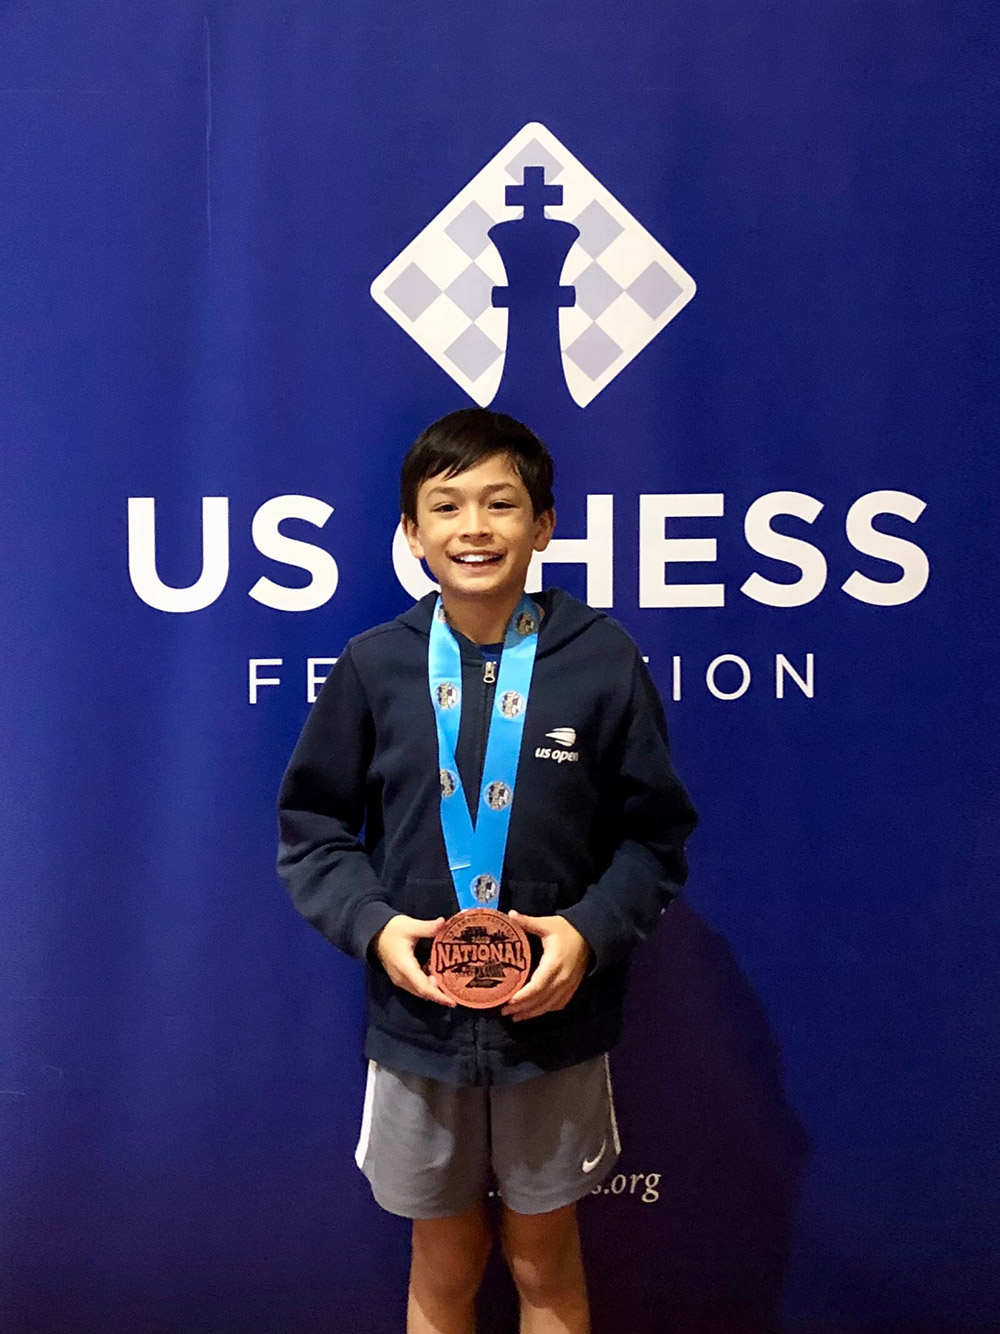 Oliver receives a medal at the 2019 National K-12 Grade Chess Championships in Orlando. December, 2019